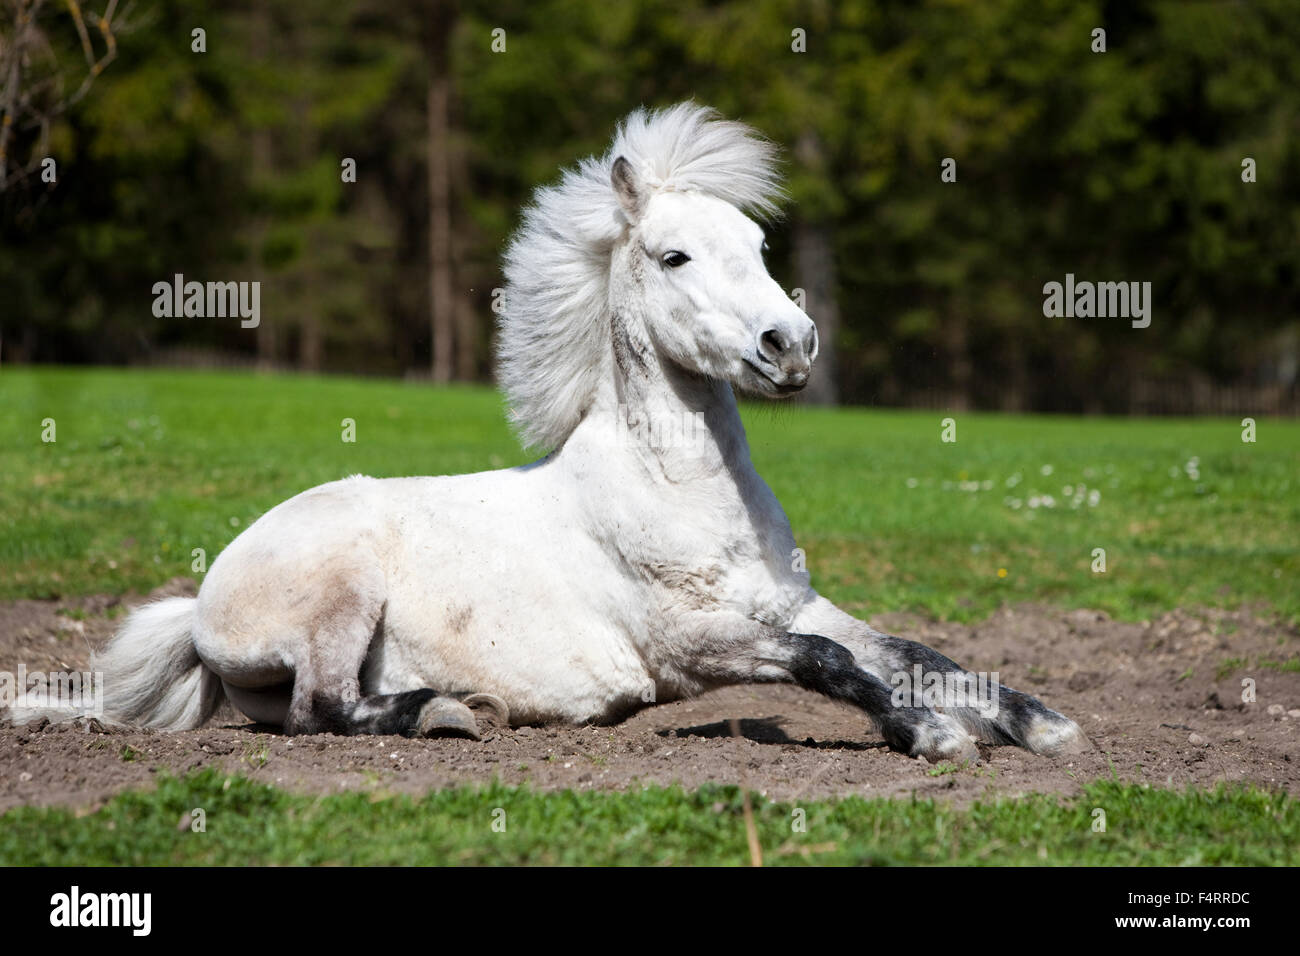 Pony getting up after rolling around, Schimmel, Austria Stock Photo